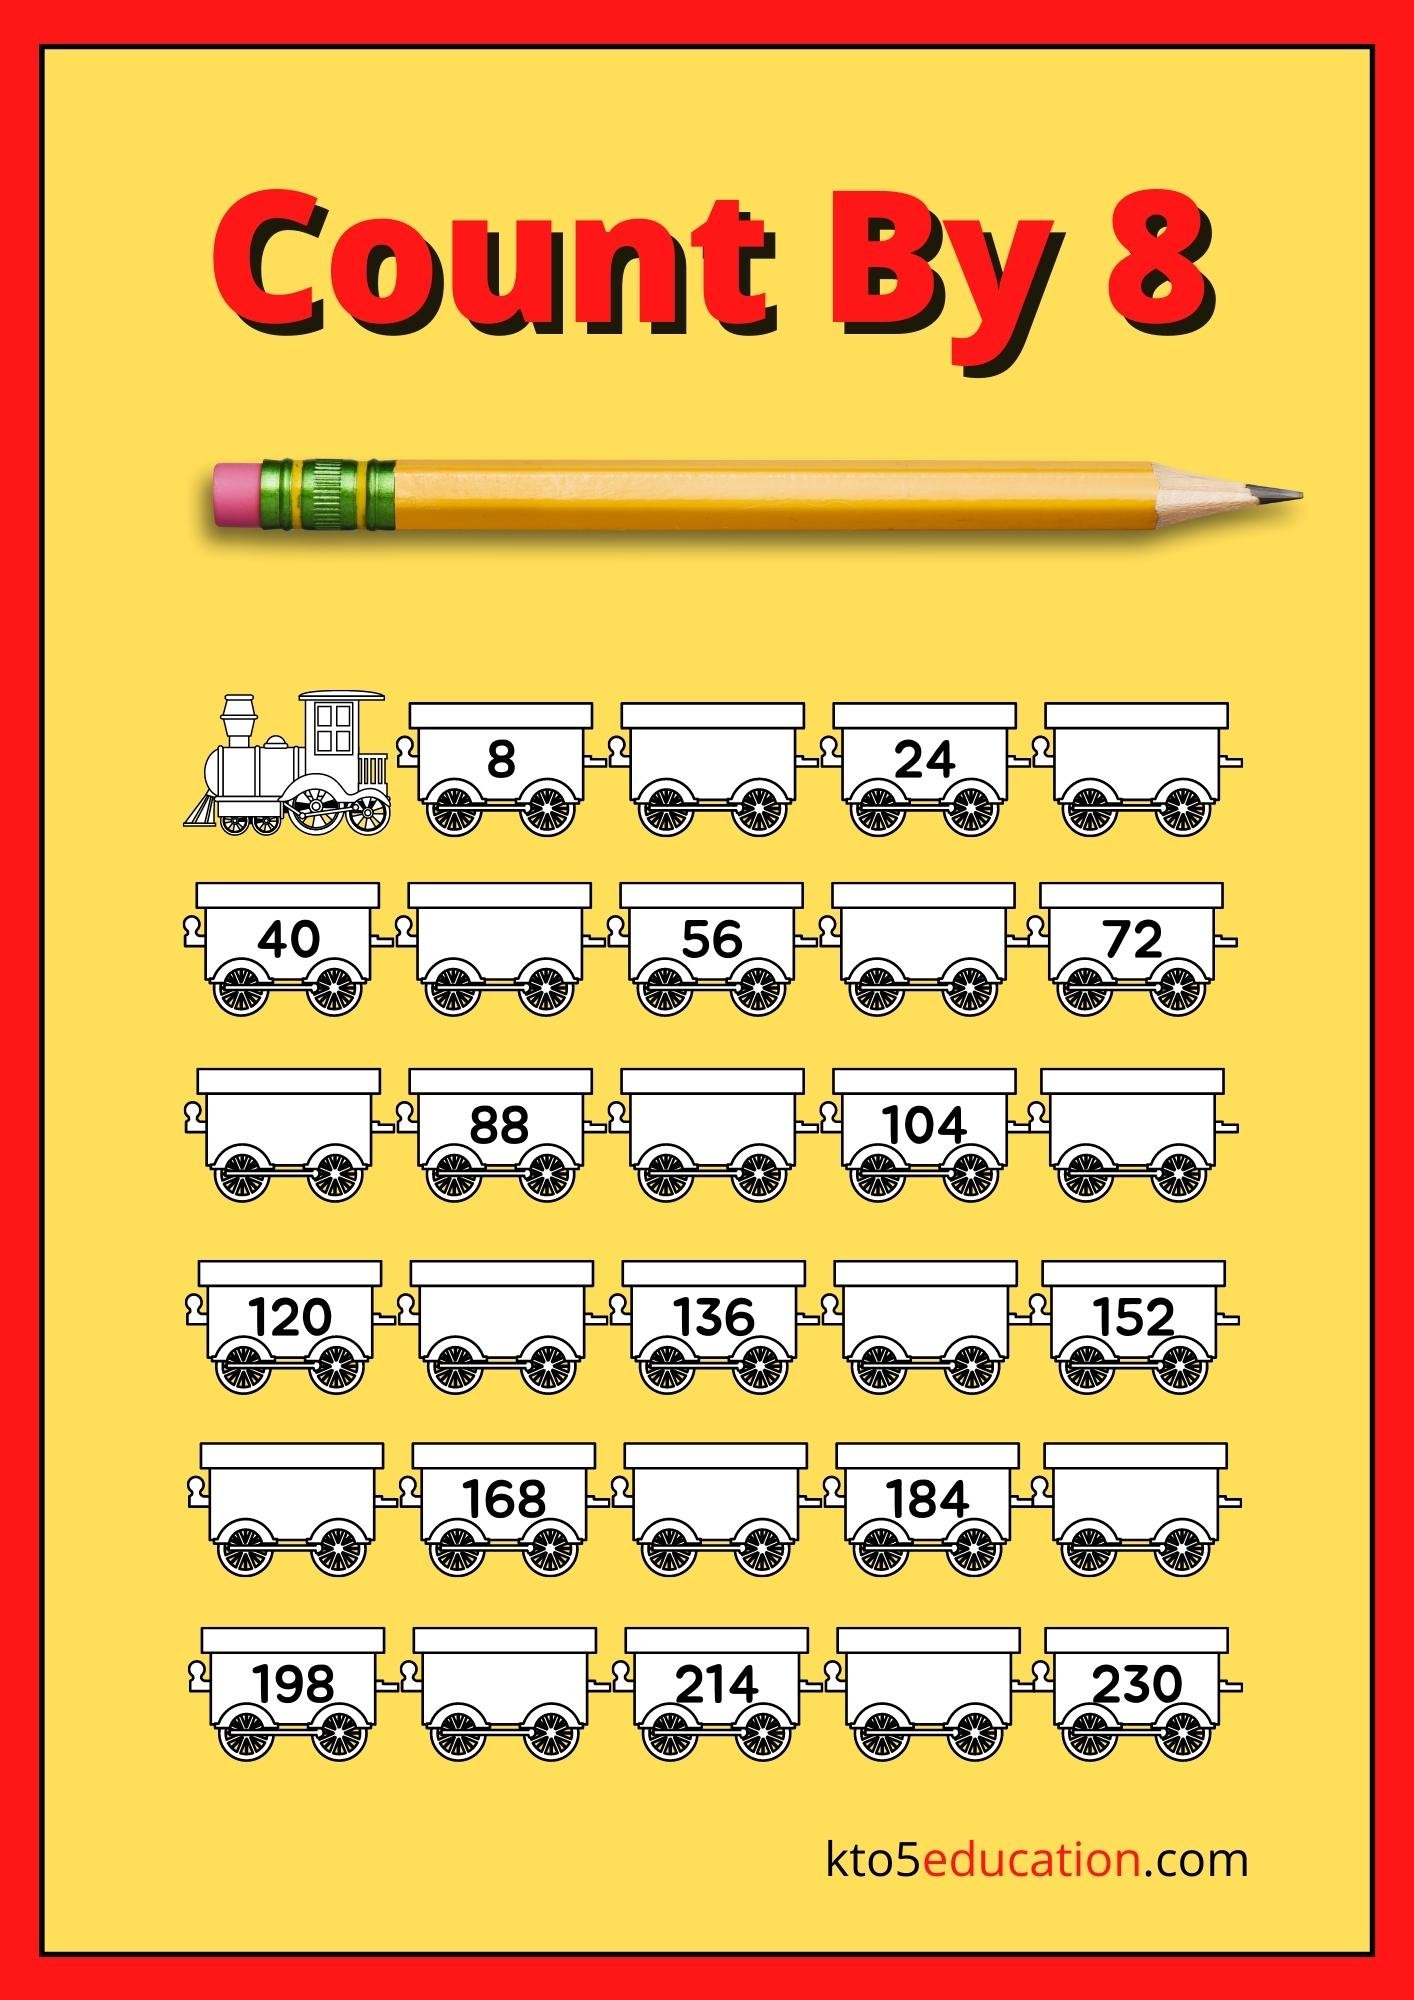 Count By 8 Worksheet For Kids